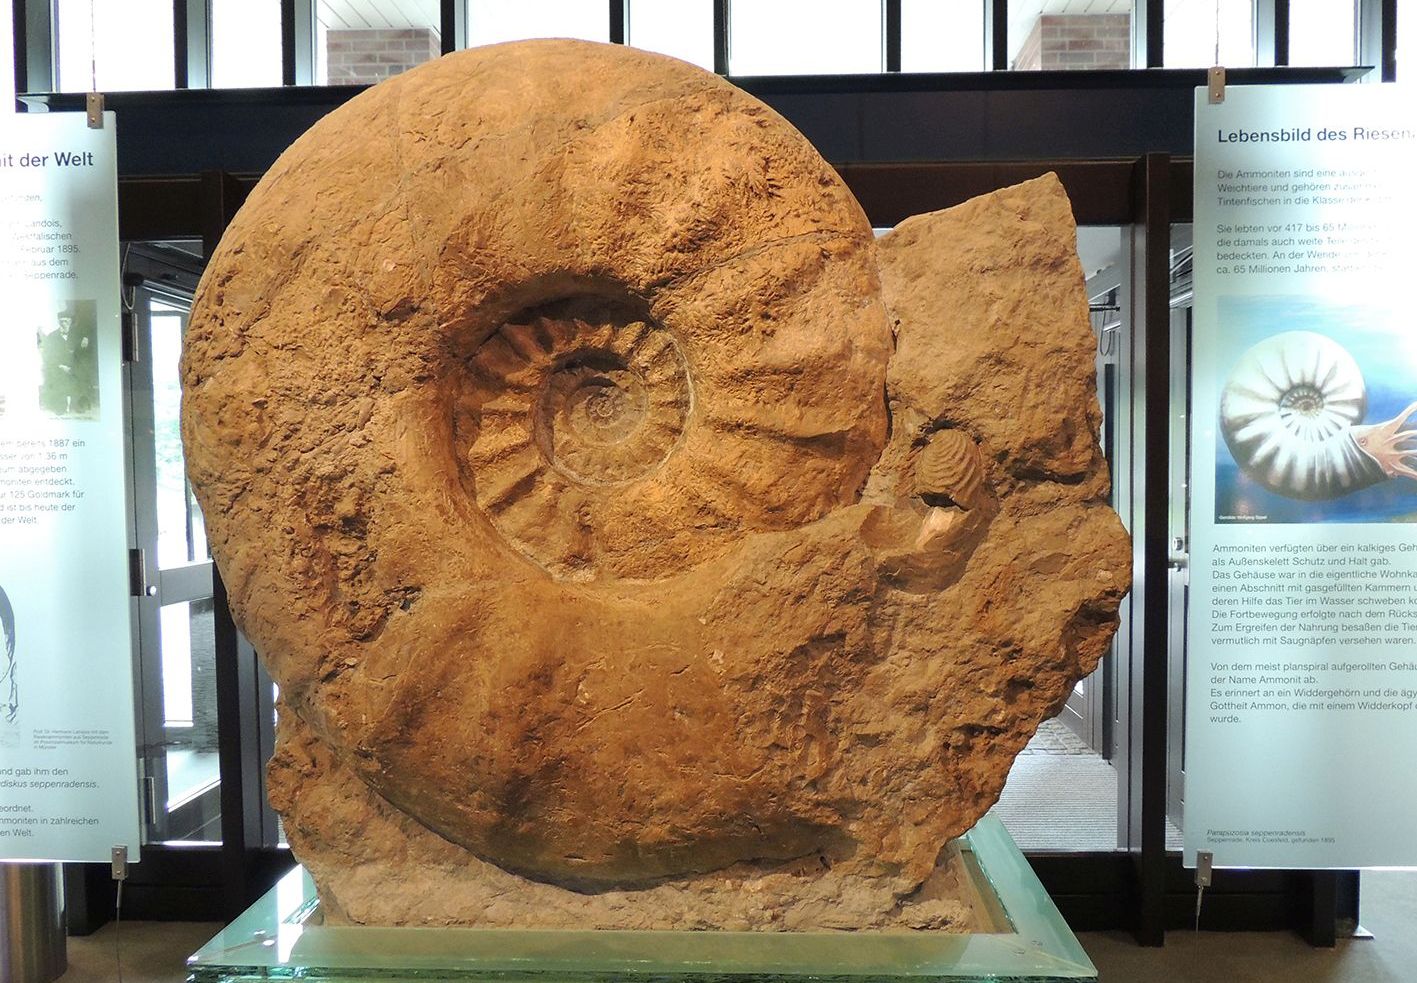 The largest ammo<em></em>nite specimen (1.8m in diameter) in the world housed in the Munster Natural History Museum, Germany